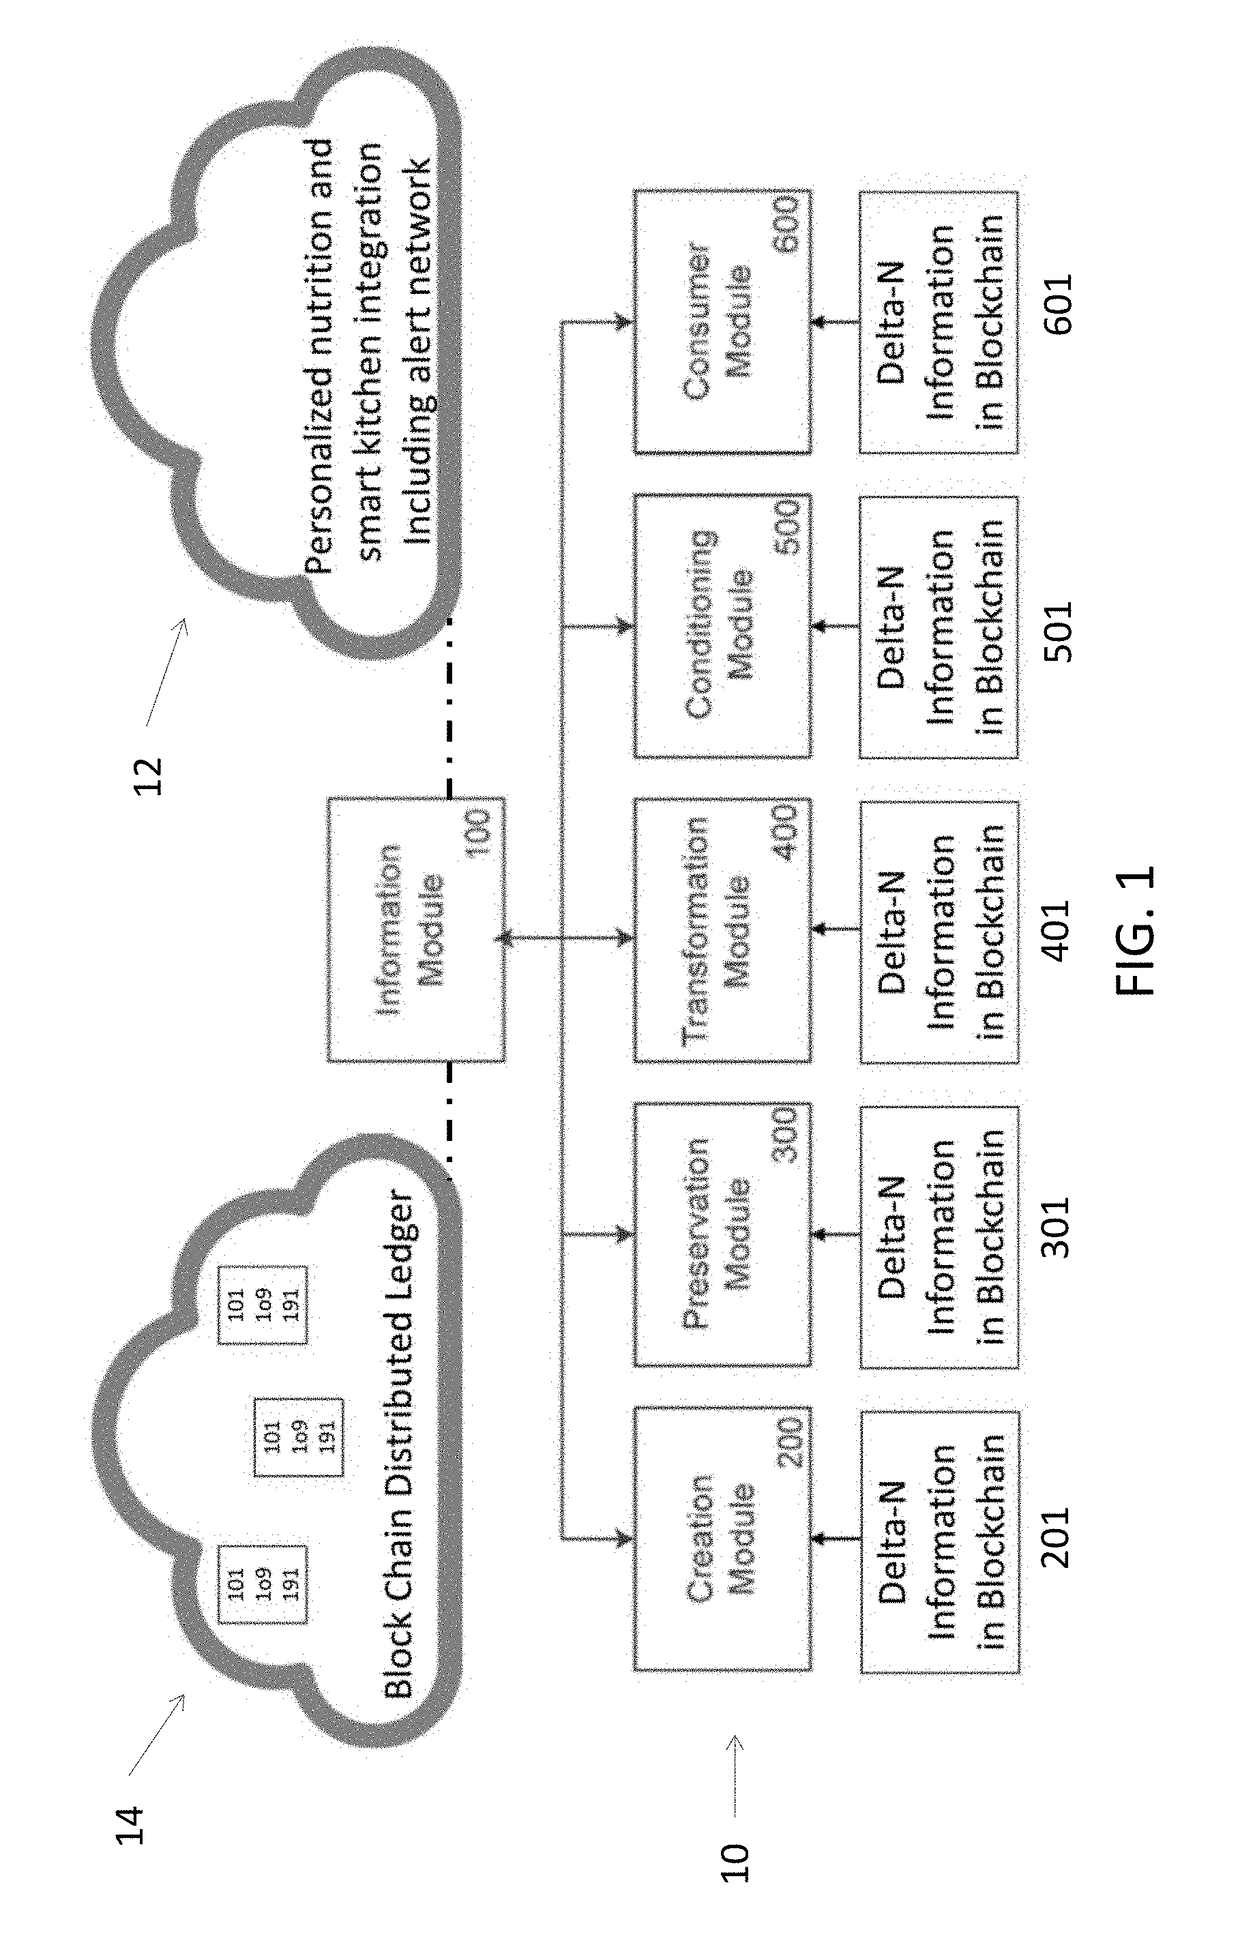 Trusted Food Traceability System and Method and Sensor Network